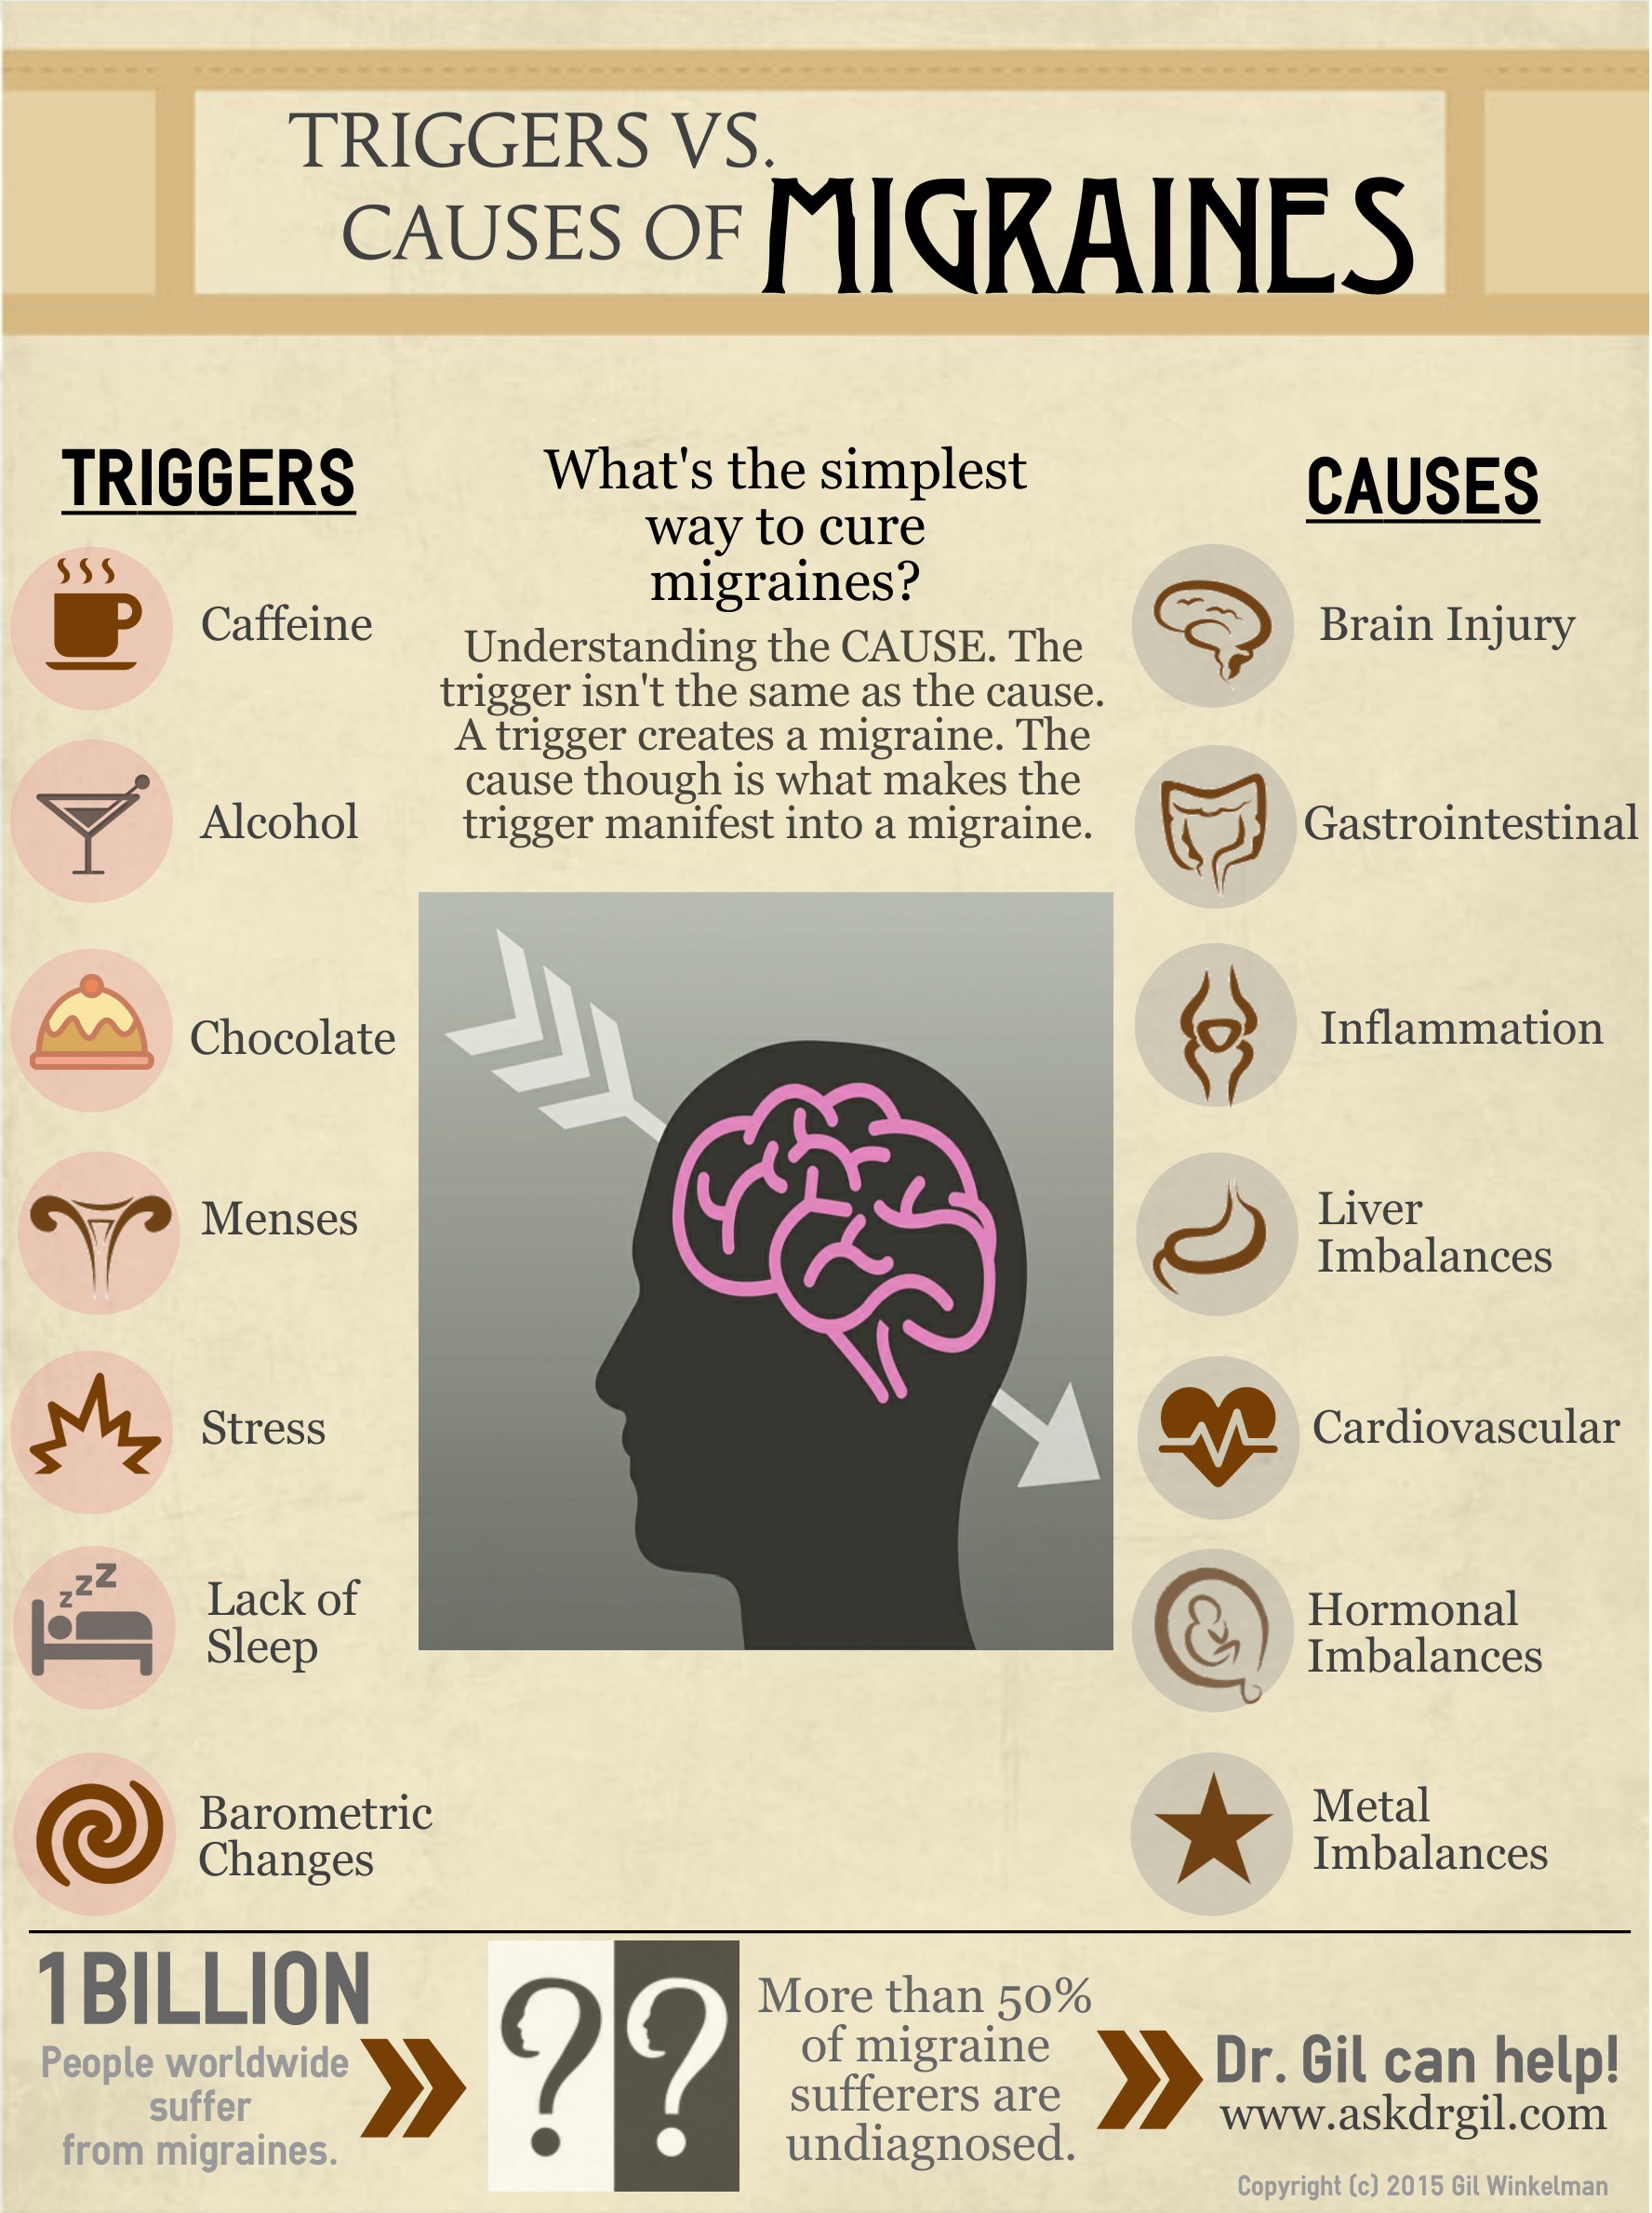 Handy Charts to Help Deal with Migraines | Health